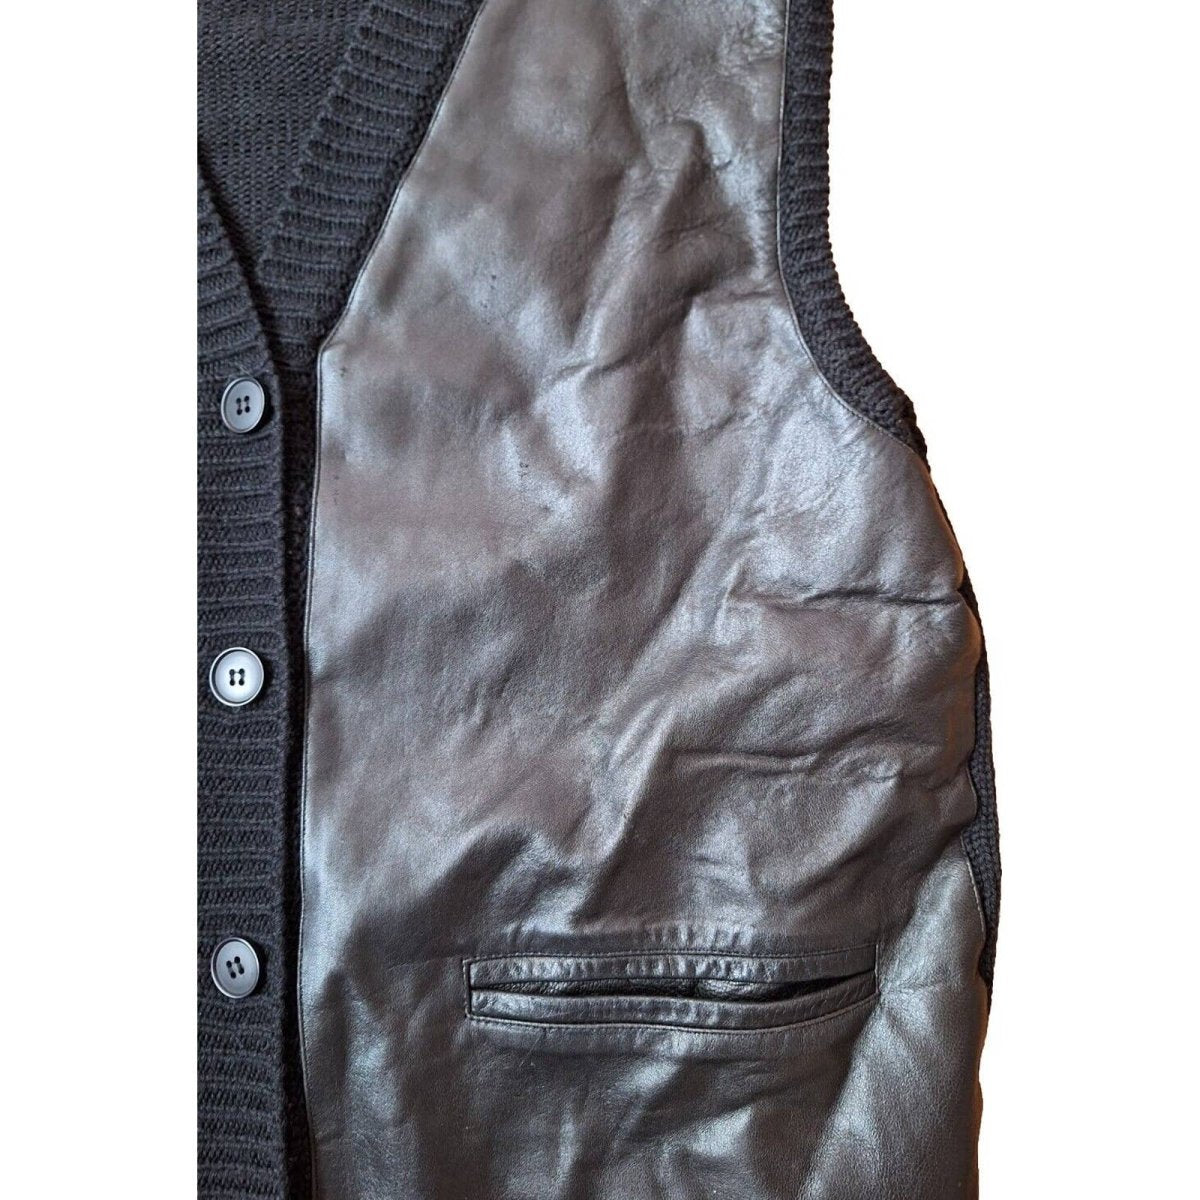 Vintage 80s/90s Black Leather Front Sweater Vest Women's Size Medium - themallvintage The Mall Vintage